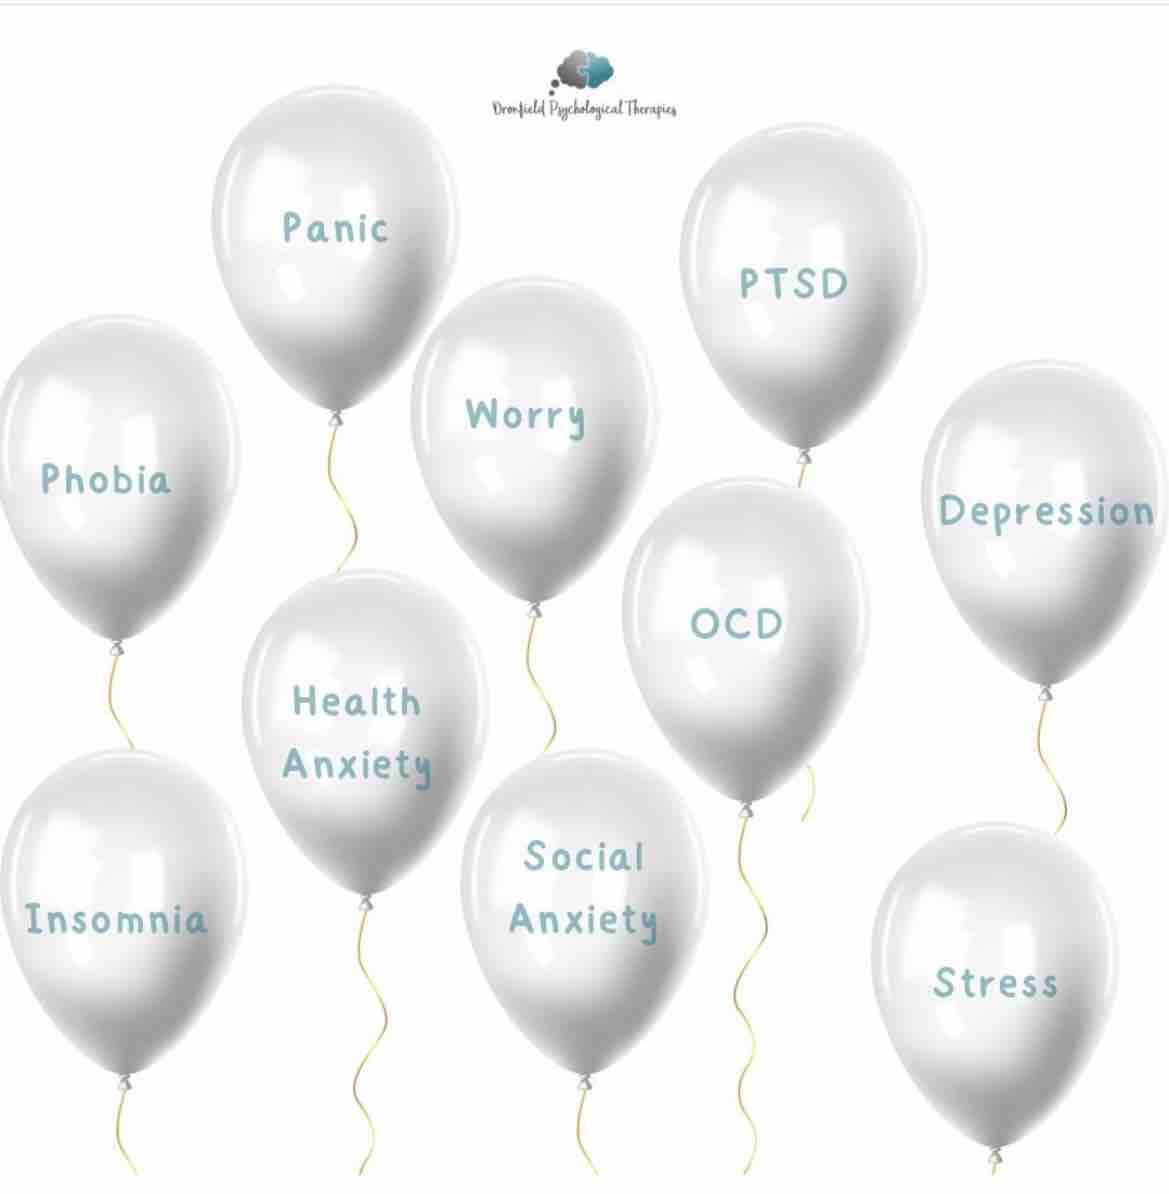 🎈Some of the issues we treat 🎈#panic #ptsd #SocialAnxiety #depression #ocd #worry #phobias #HealthAnxiety #agoraphobia #anxiety #AnxietyHelp #AnxietyTherapy #DepressionHelp #DepressionTherapy #dronfield #CognitiveBehaviouralTherapy #counselling #emdr #psychotherapy #derbyshire